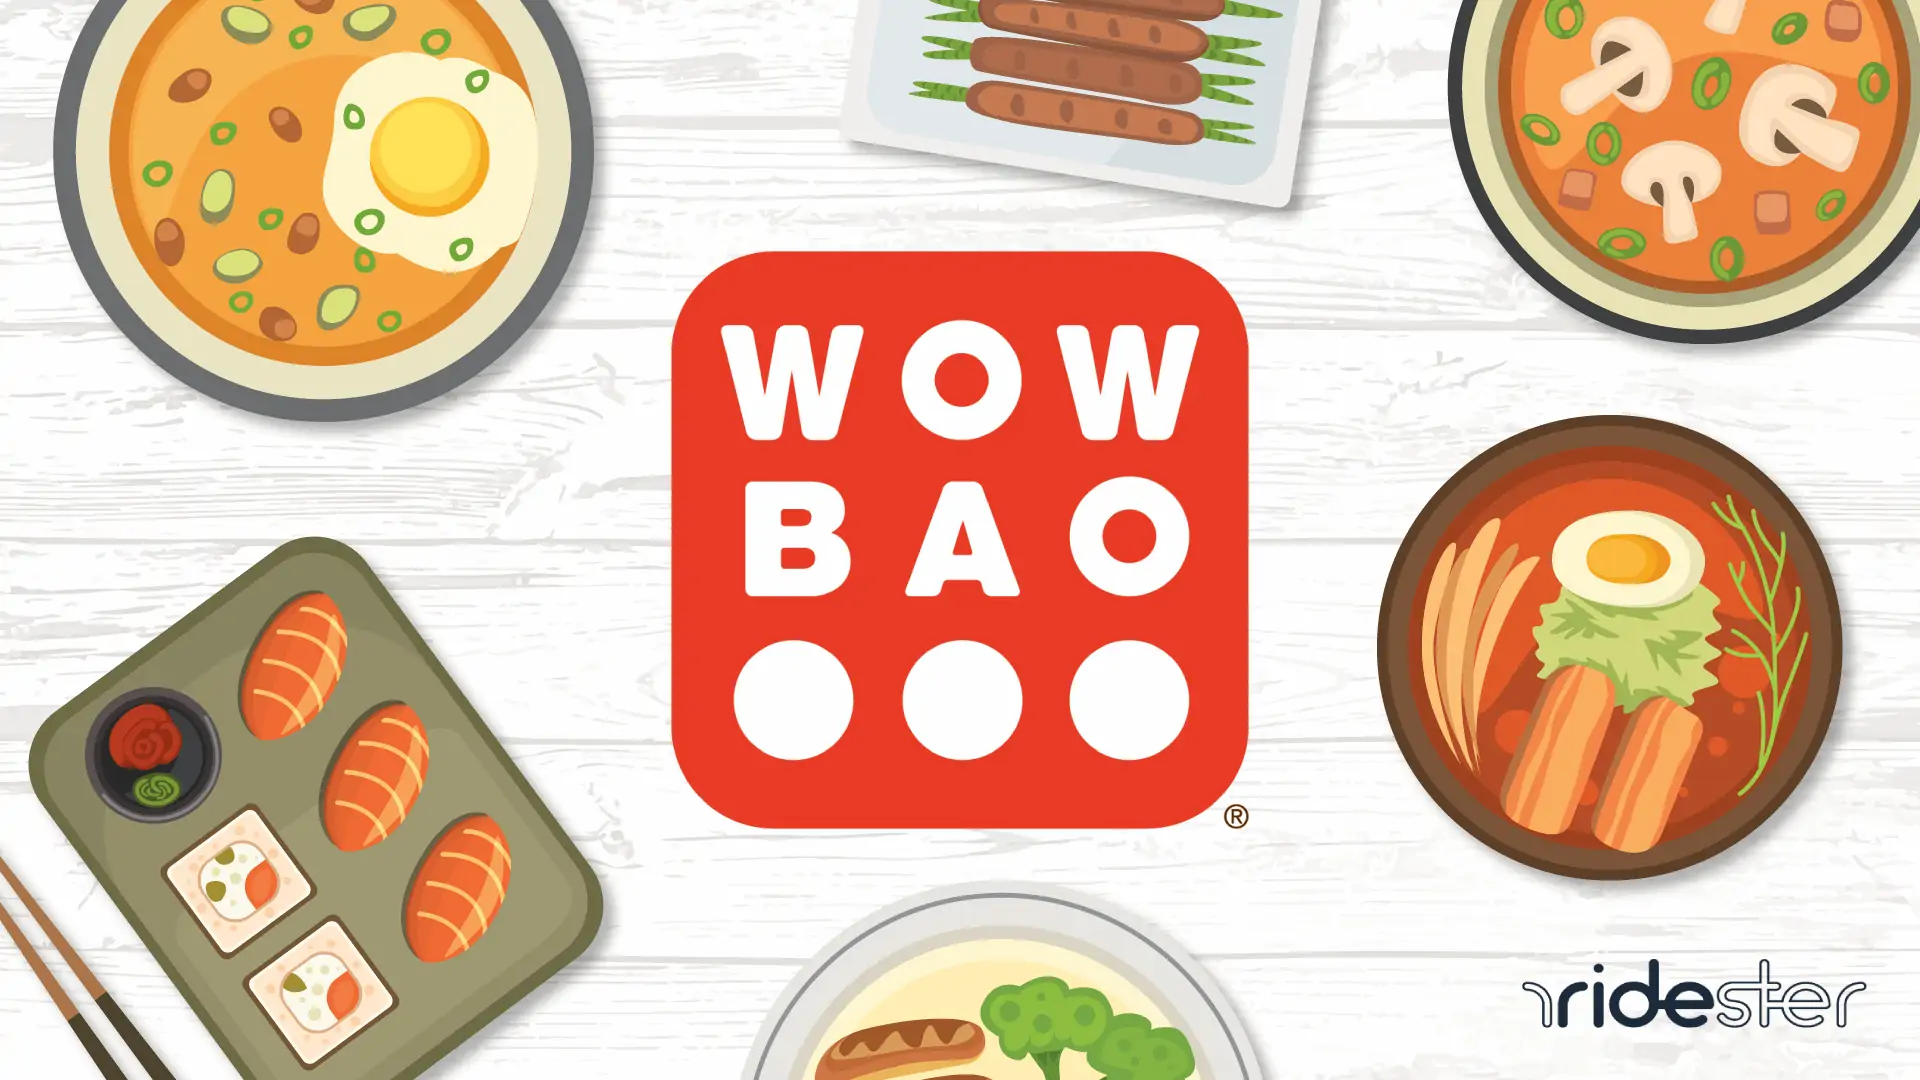 vector illustration of wow bao logo surrounded by food items